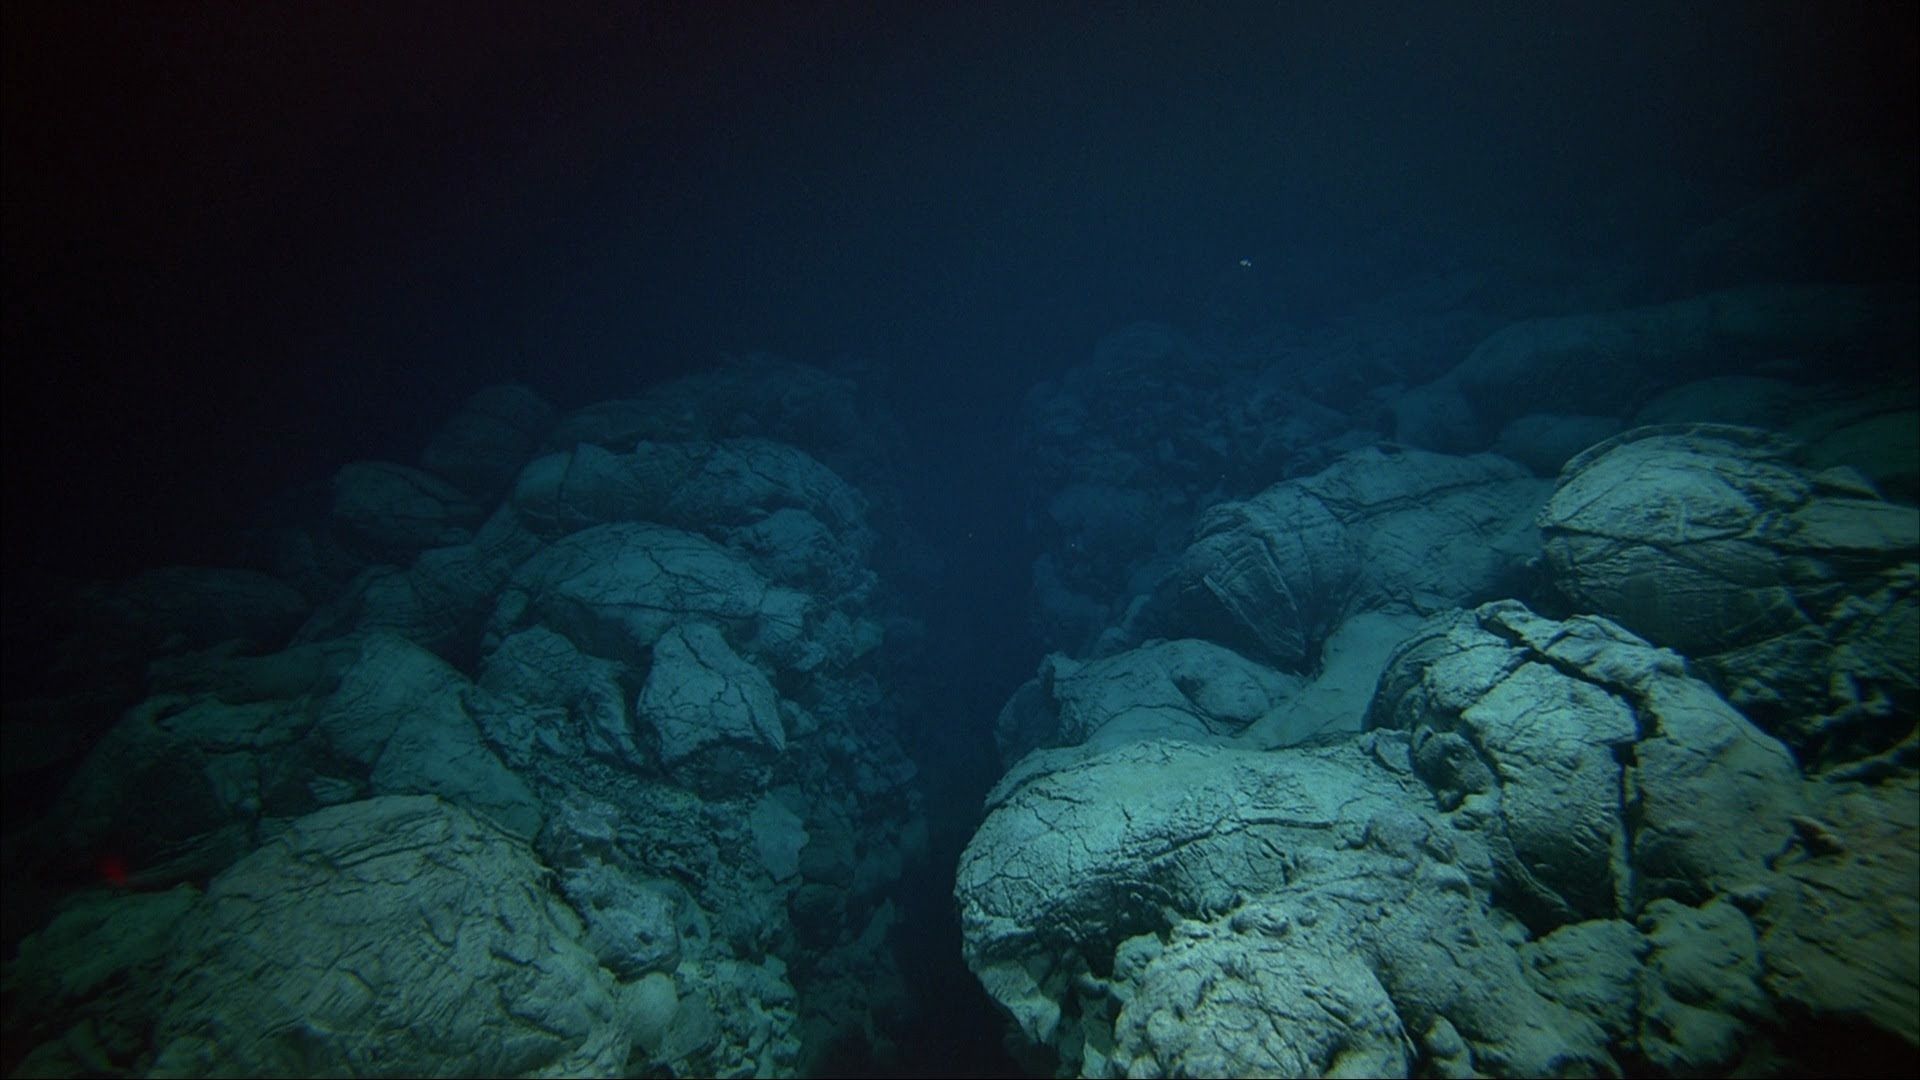 Regulating the seabed: determining the future of deep sea mining